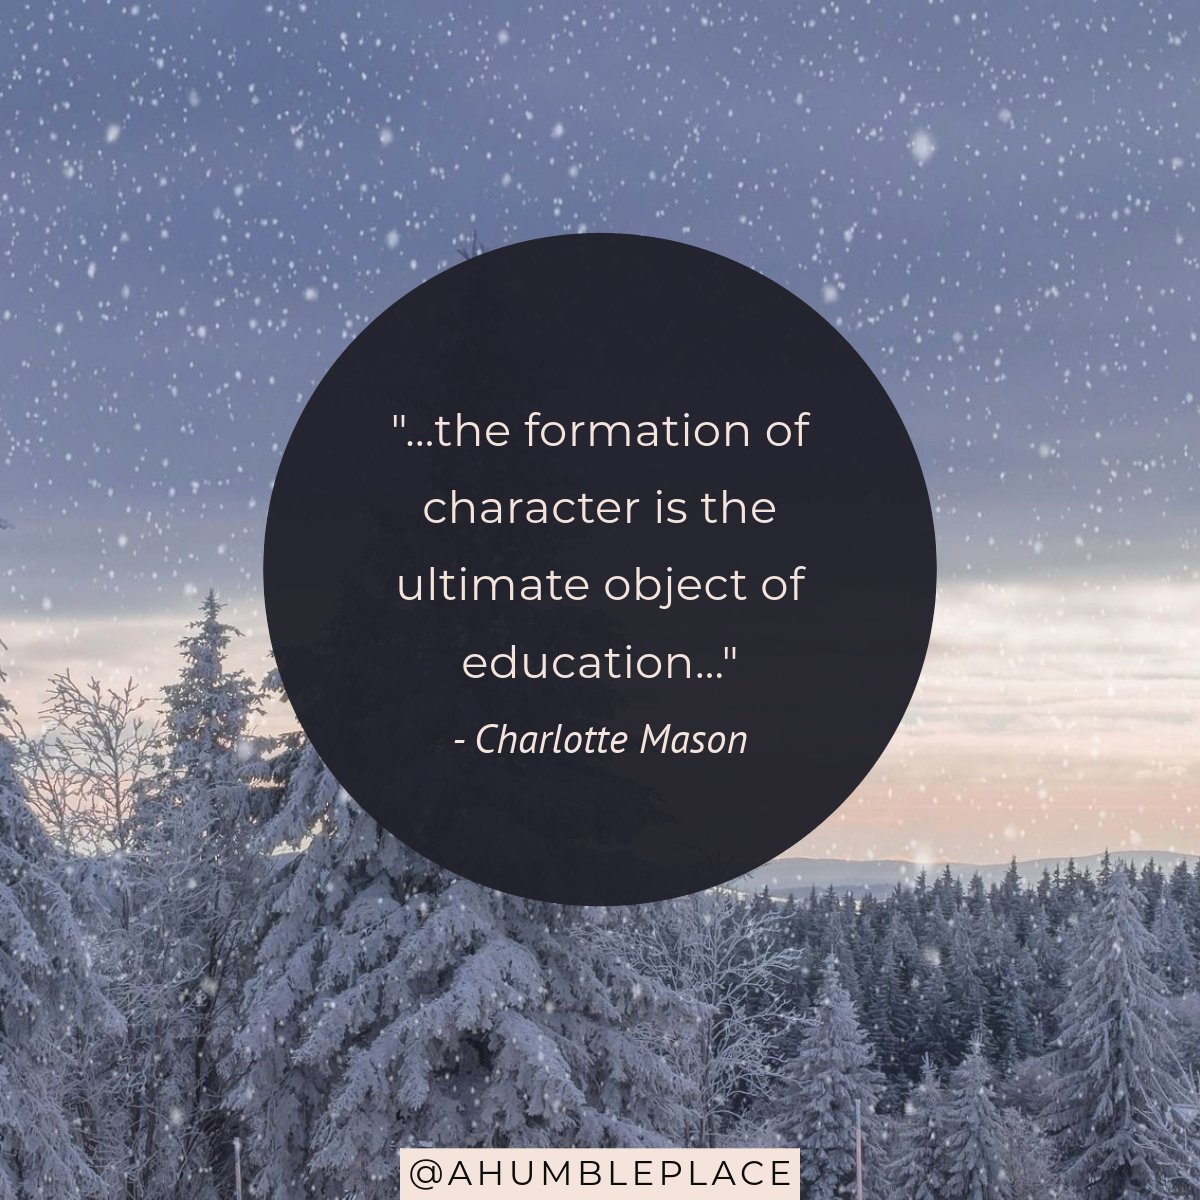 '...the formation of character is the ultimate object of education...' Charlotte Mason (Parents and Children, p. 83) (When you begin to look at education in this way, a lot changes.) #charlottemason #charlottemasonquotes #quotes #quote #homeschool #homeschooling